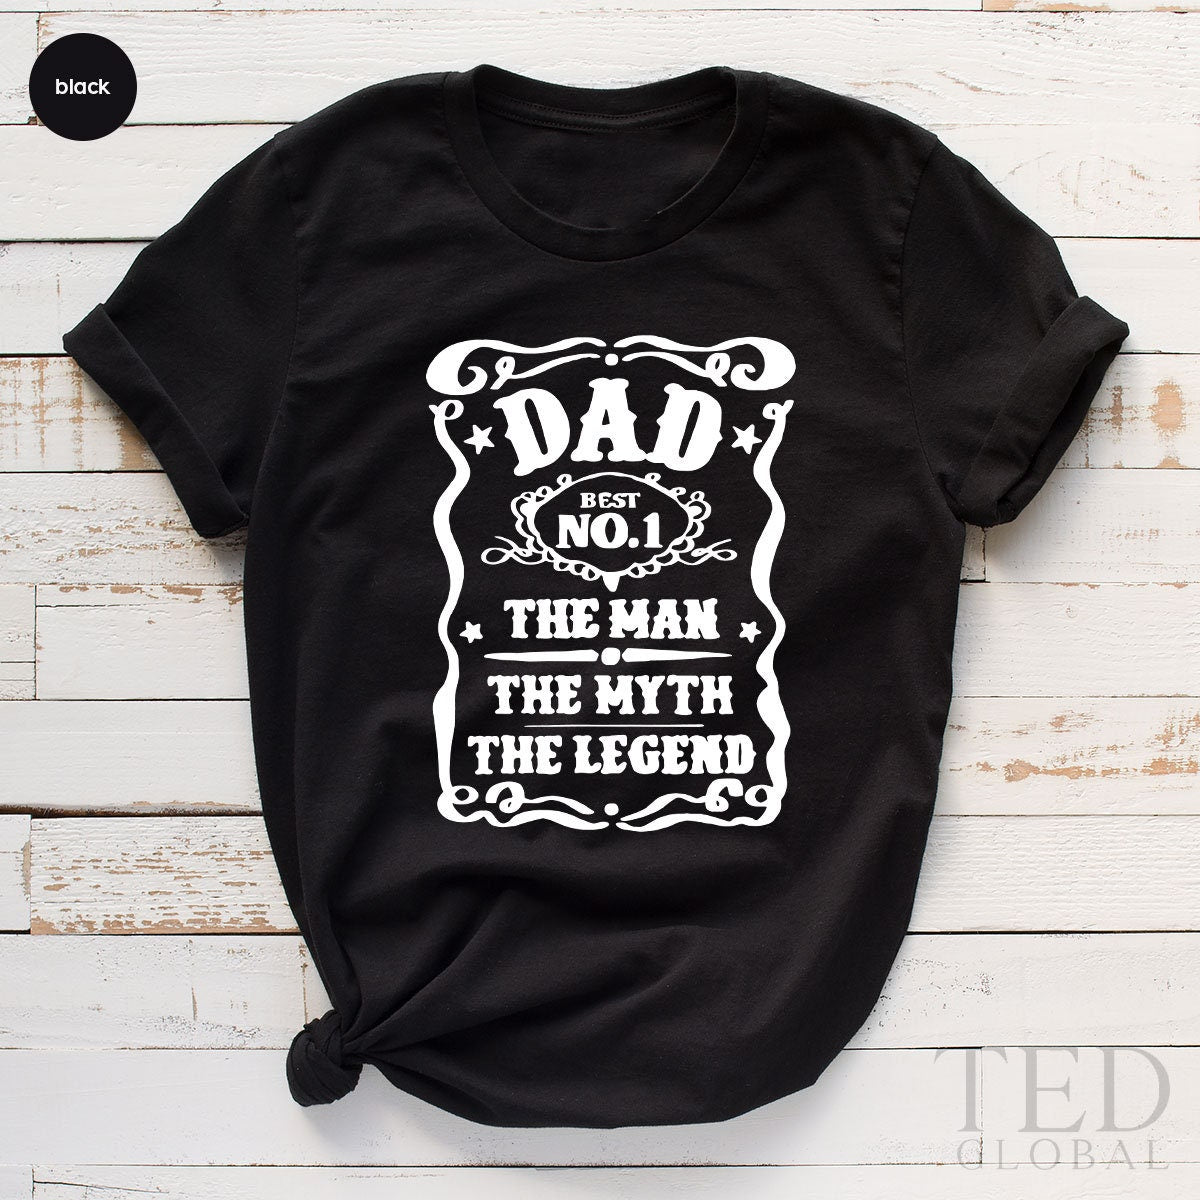 Funny Dad Shirt, Fathers Day Tee, Gift For Dad, Dad Shirt, Best Dad Shirt, Dad To Shirt, Fathers Day Gifts, Gift For Husband, Cool Dad Shirt - Fastdeliverytees.com